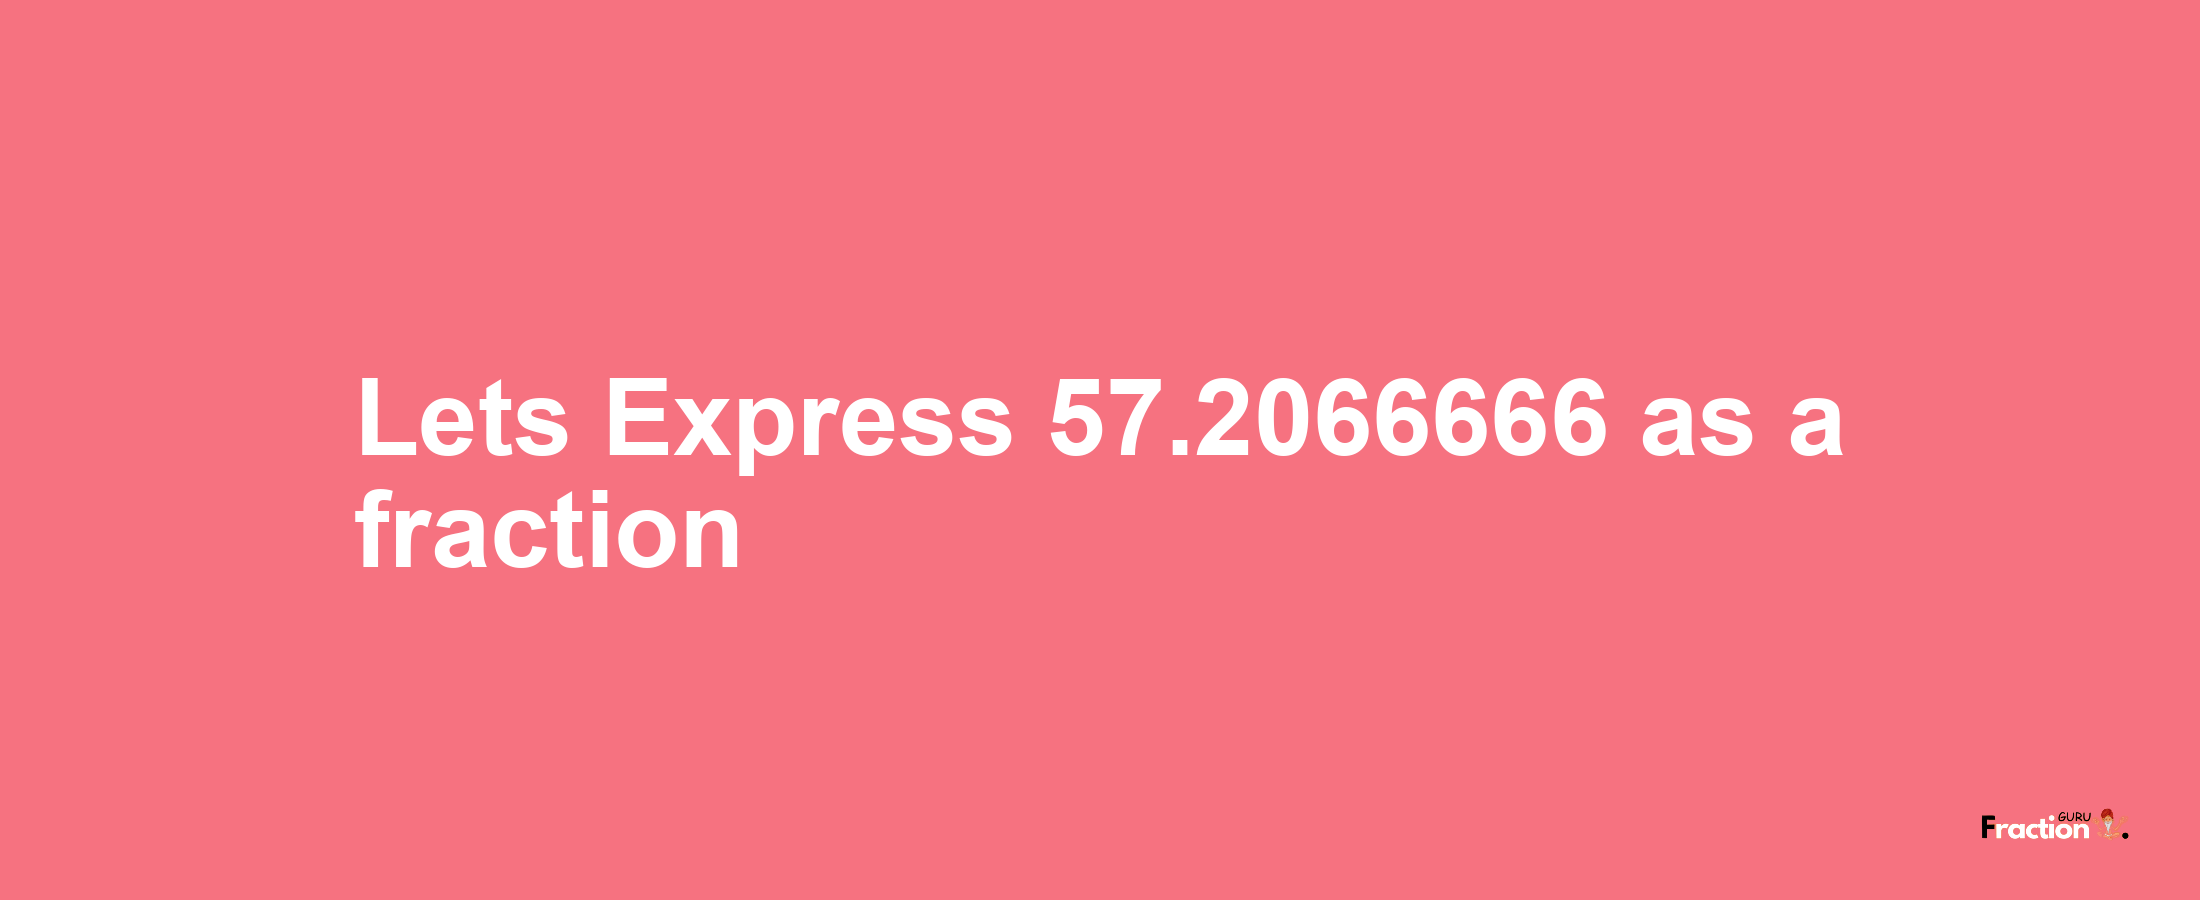 Lets Express 57.2066666 as afraction